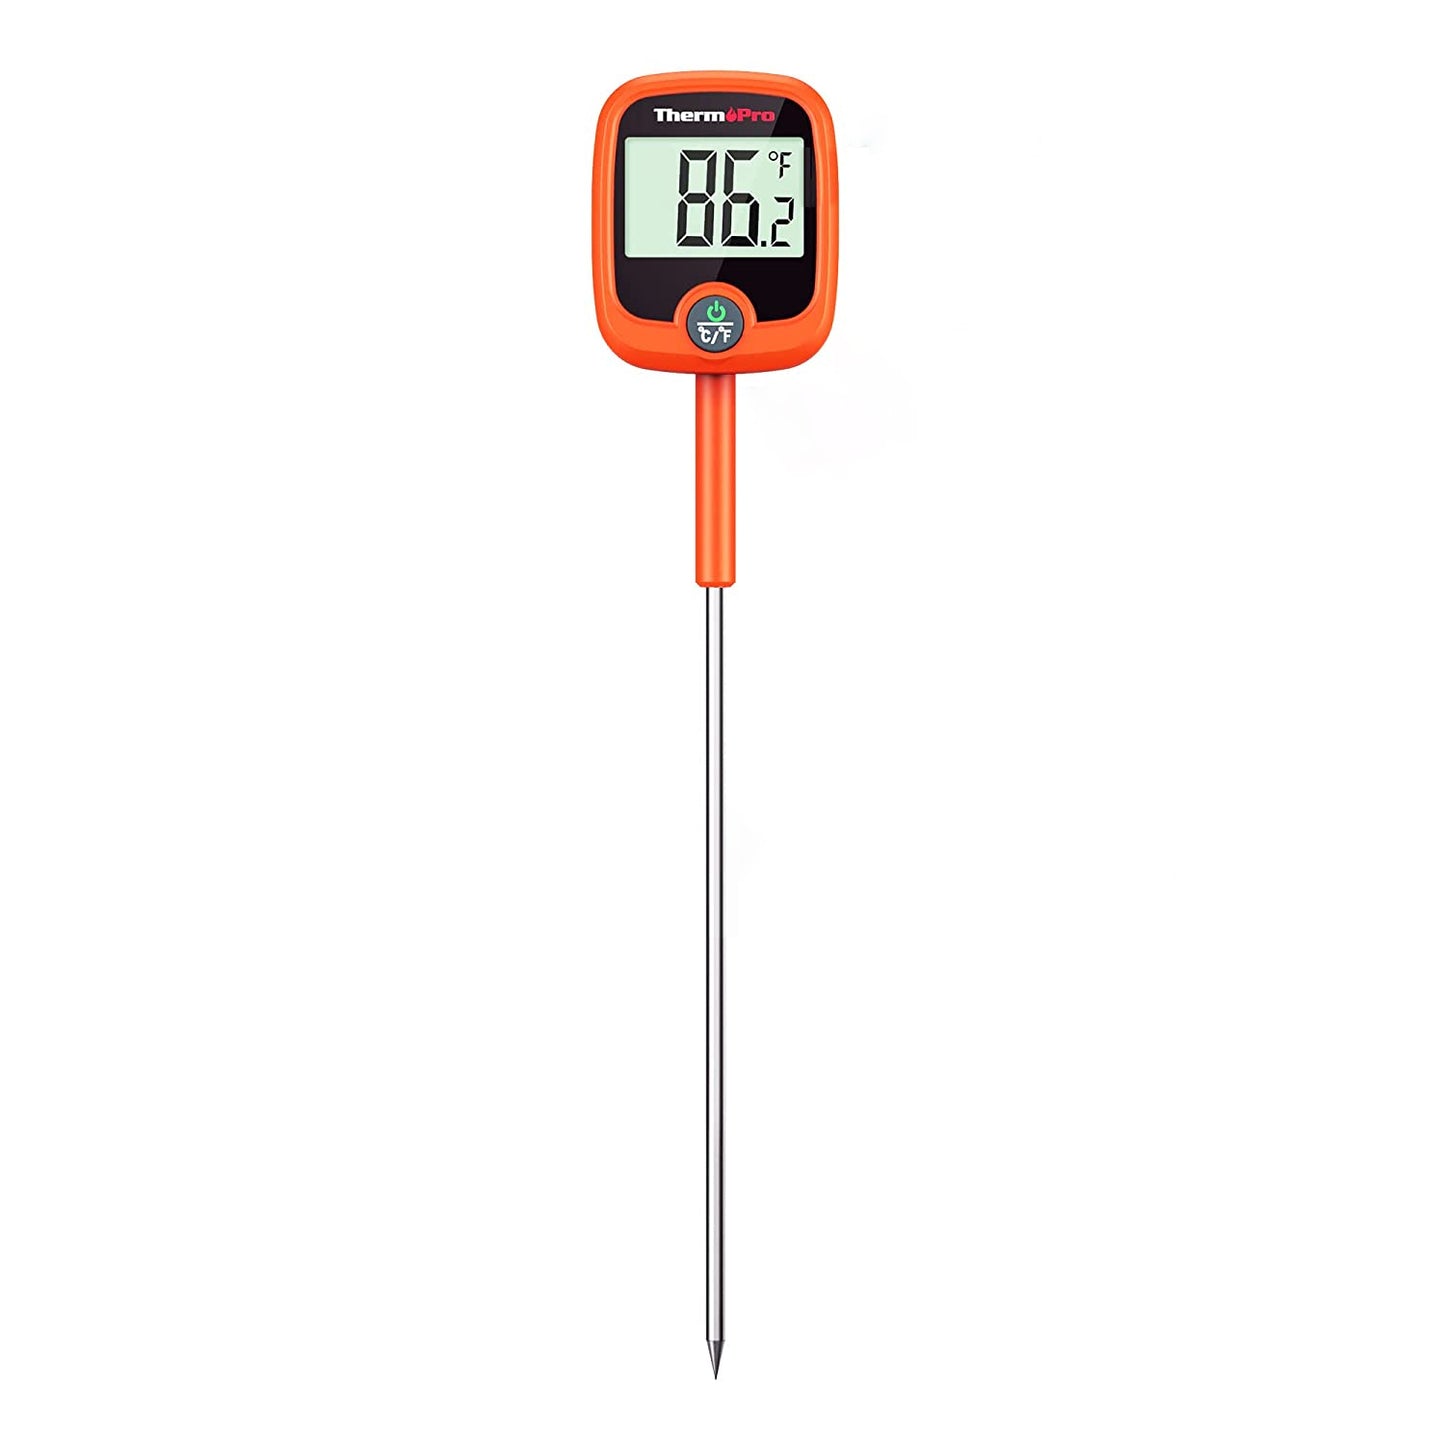 ThermoPro TP509 8" Fast Read Candy and Oil Thermometer with Included Pot Lip Clip Holder, IPX5 Waterproof Rating, and Stainless Steel Construction for Outdoor and Kitchen Cooking